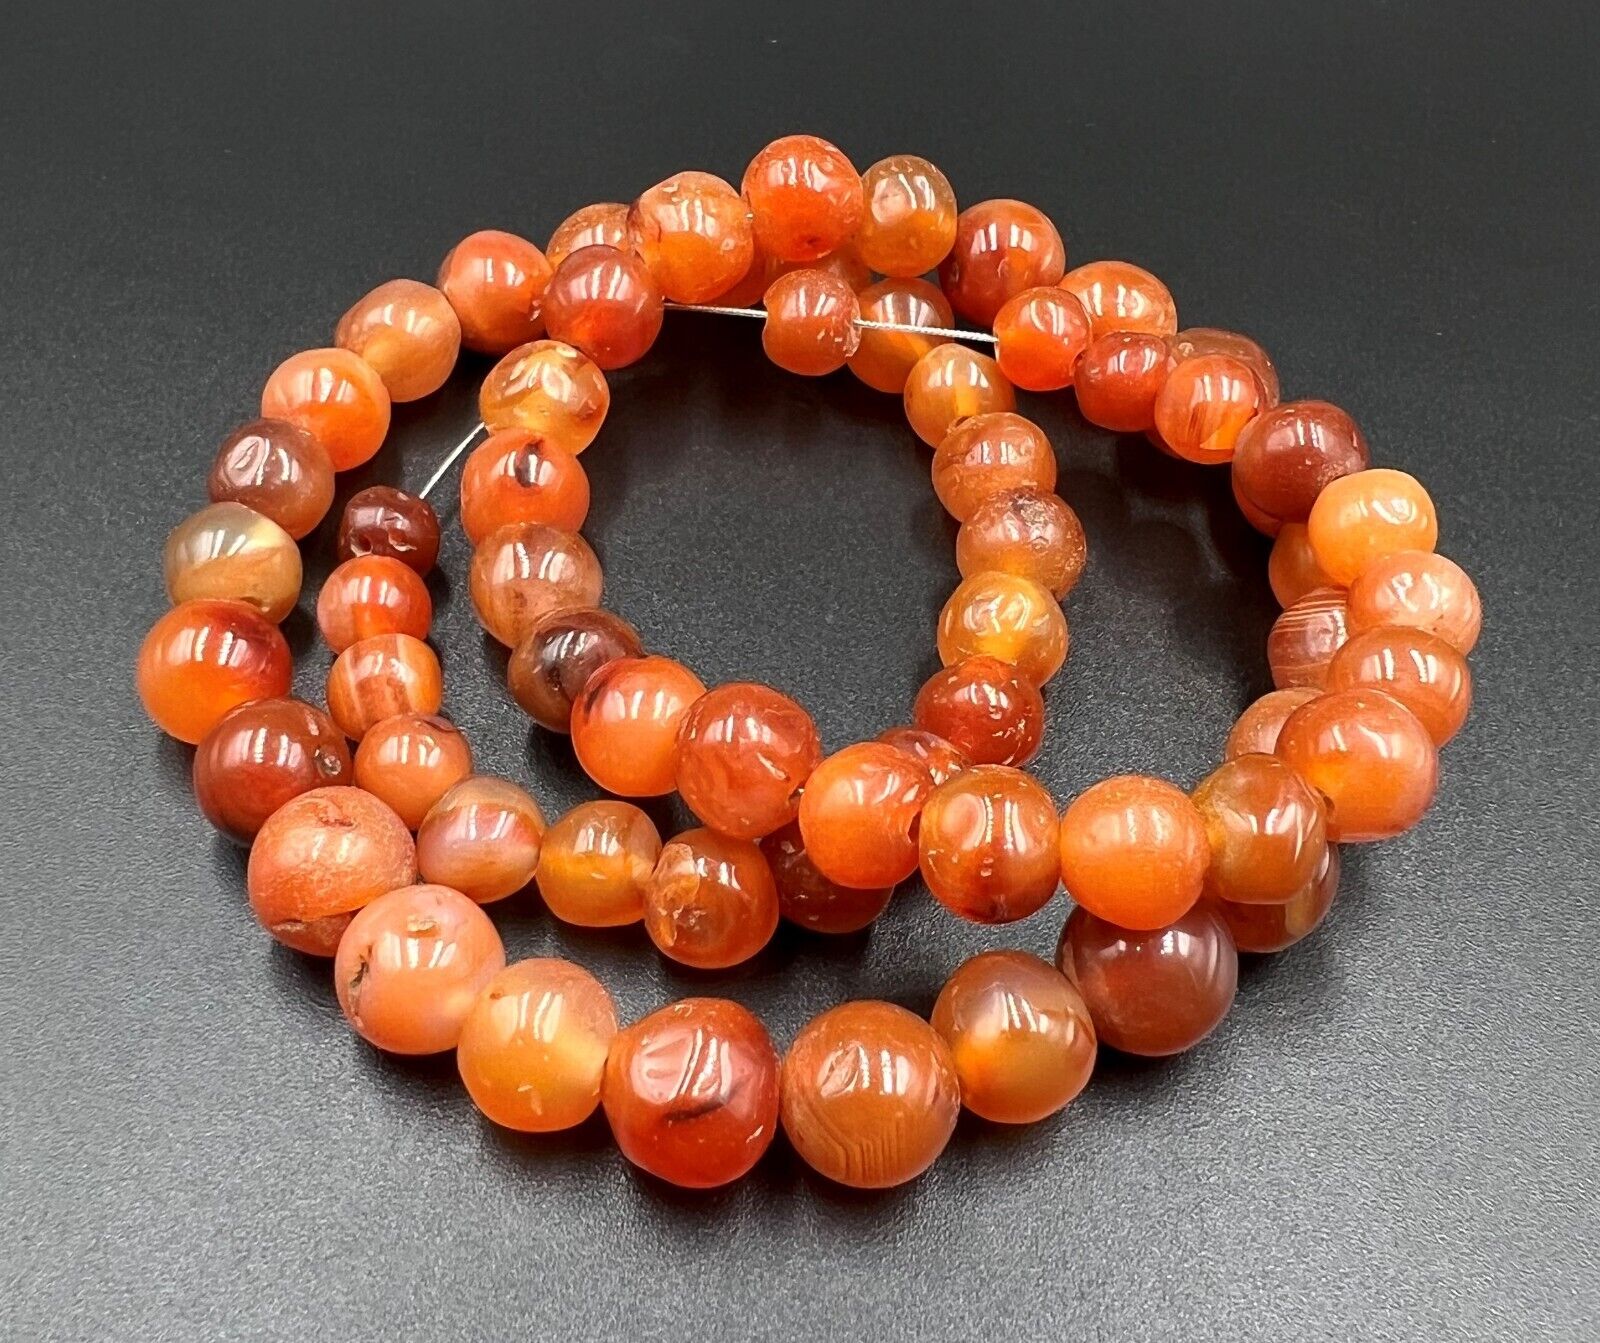 Himalayan India Tibet Nepal African Ancient Old Carnelian Agate Beads Necklace